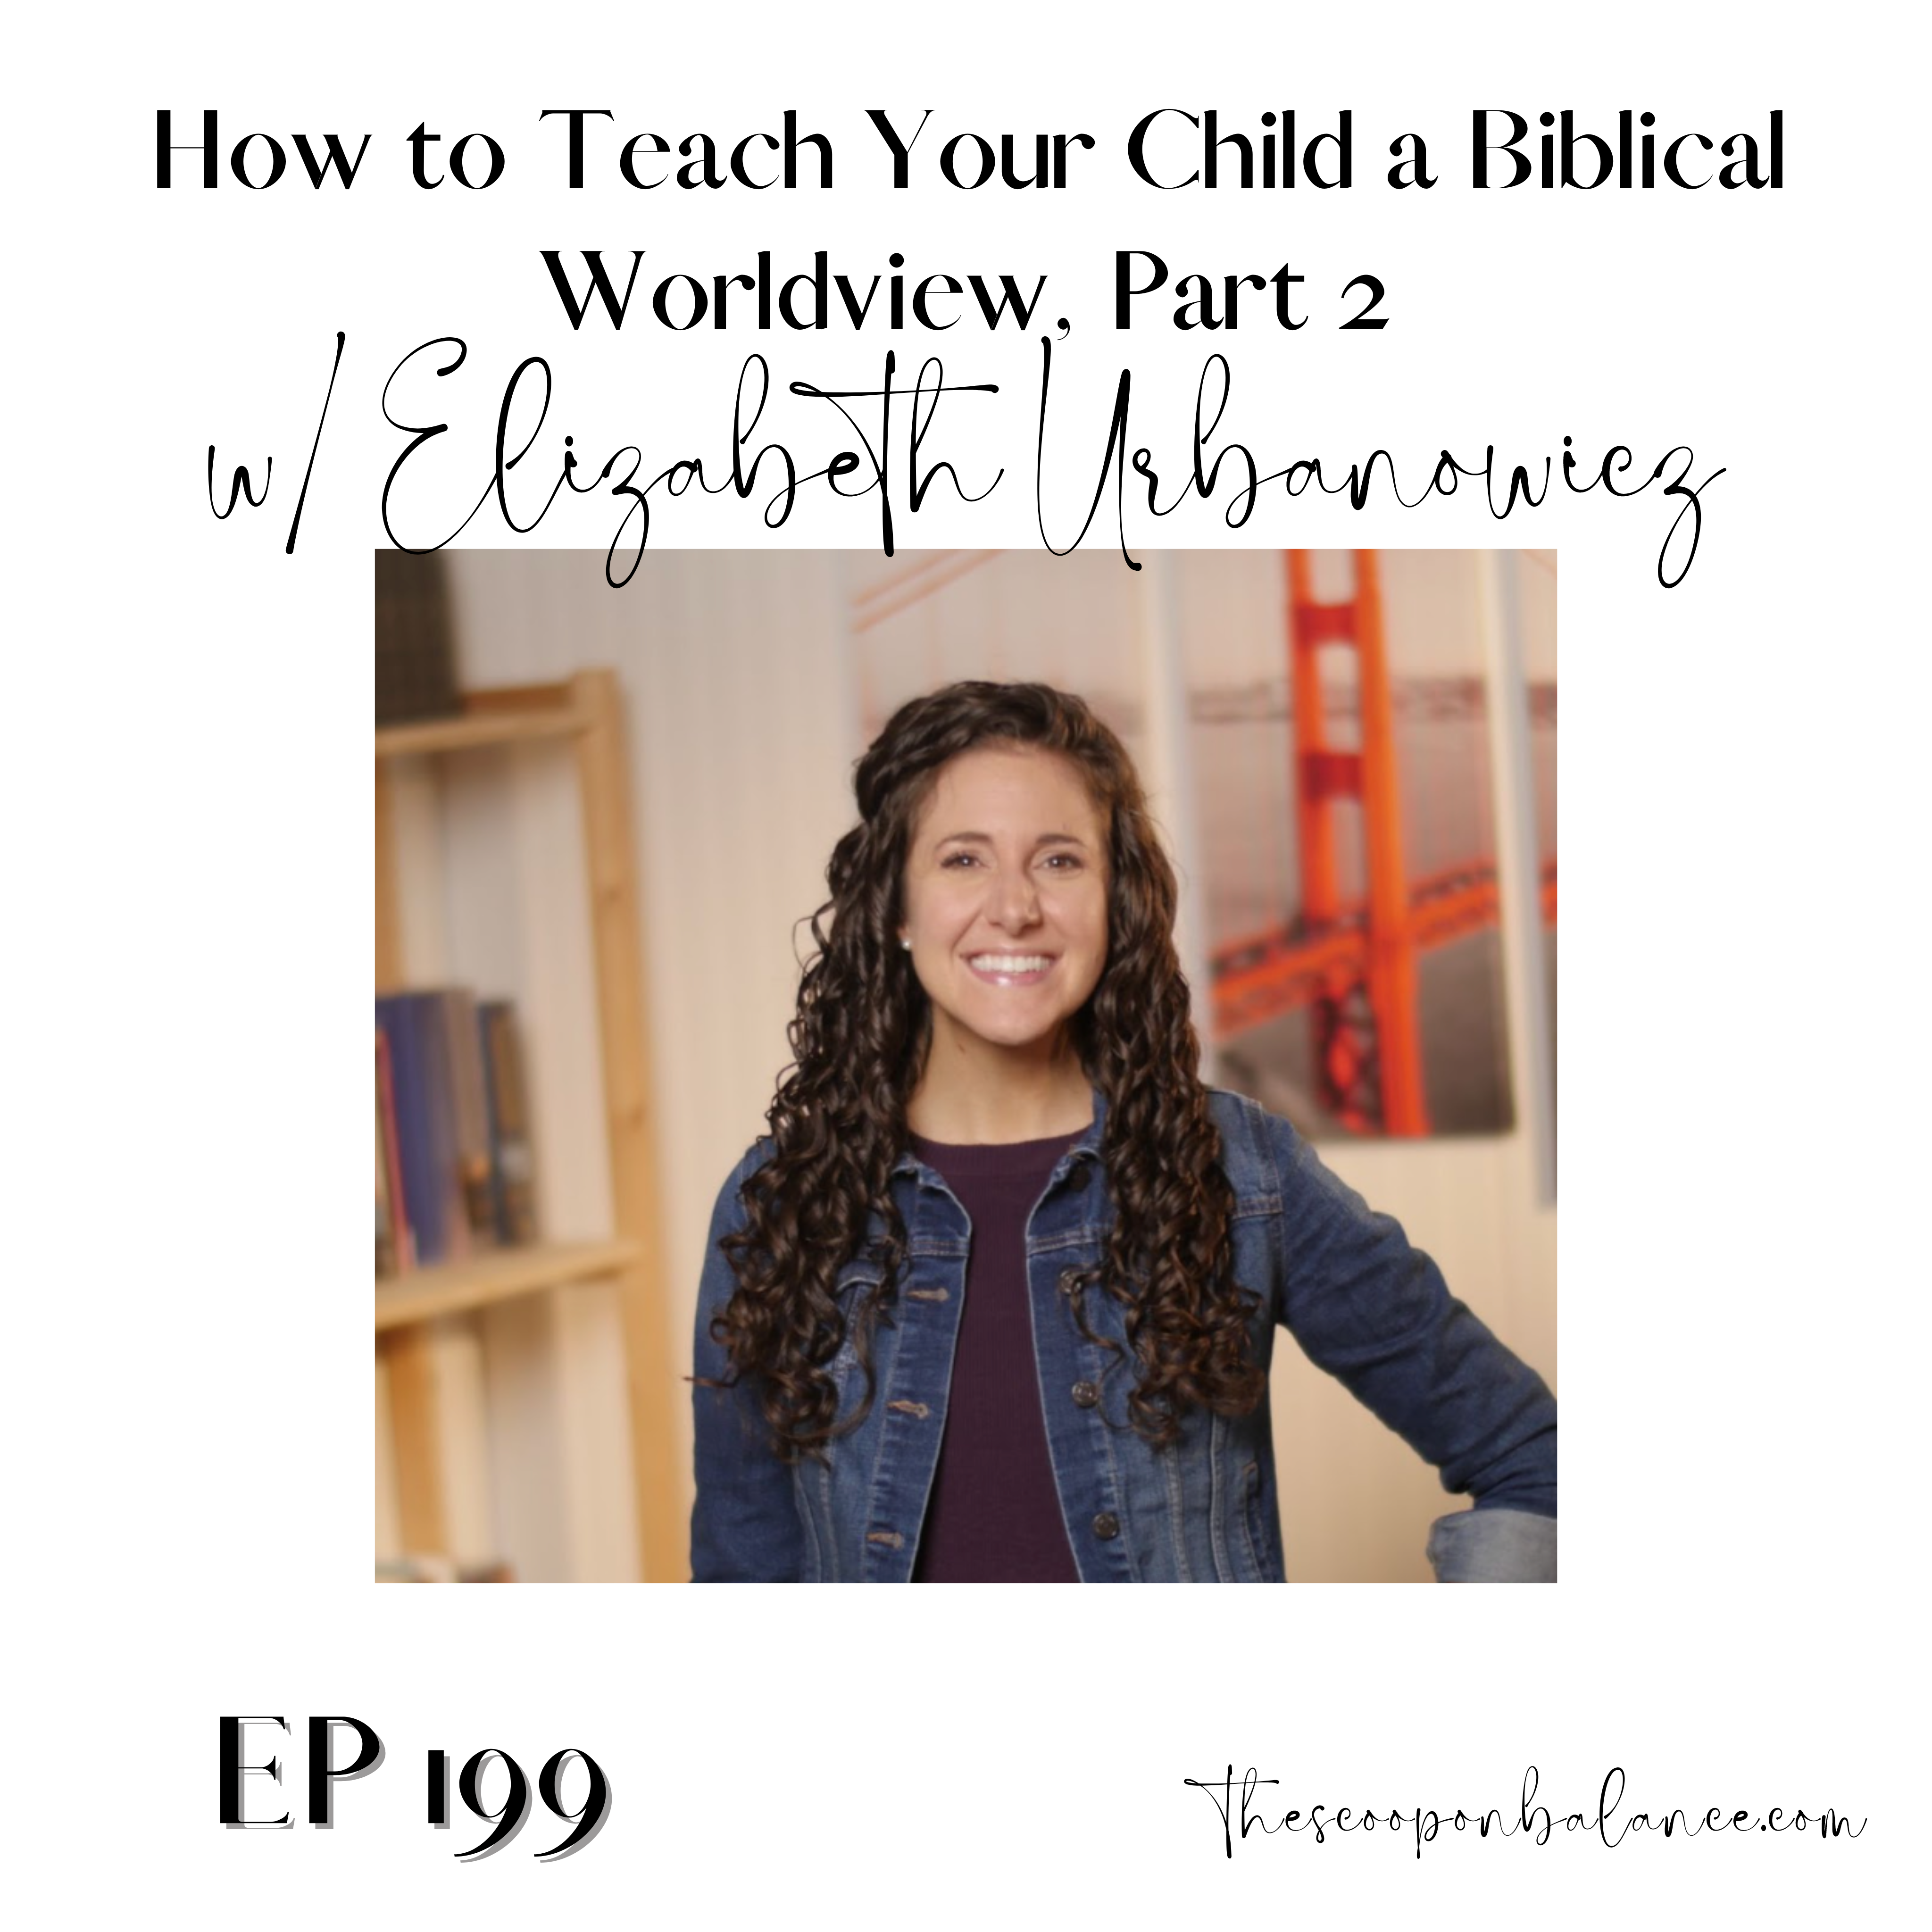 Ep 199 How to Teach Your Child a Biblical Worldview, Part 2